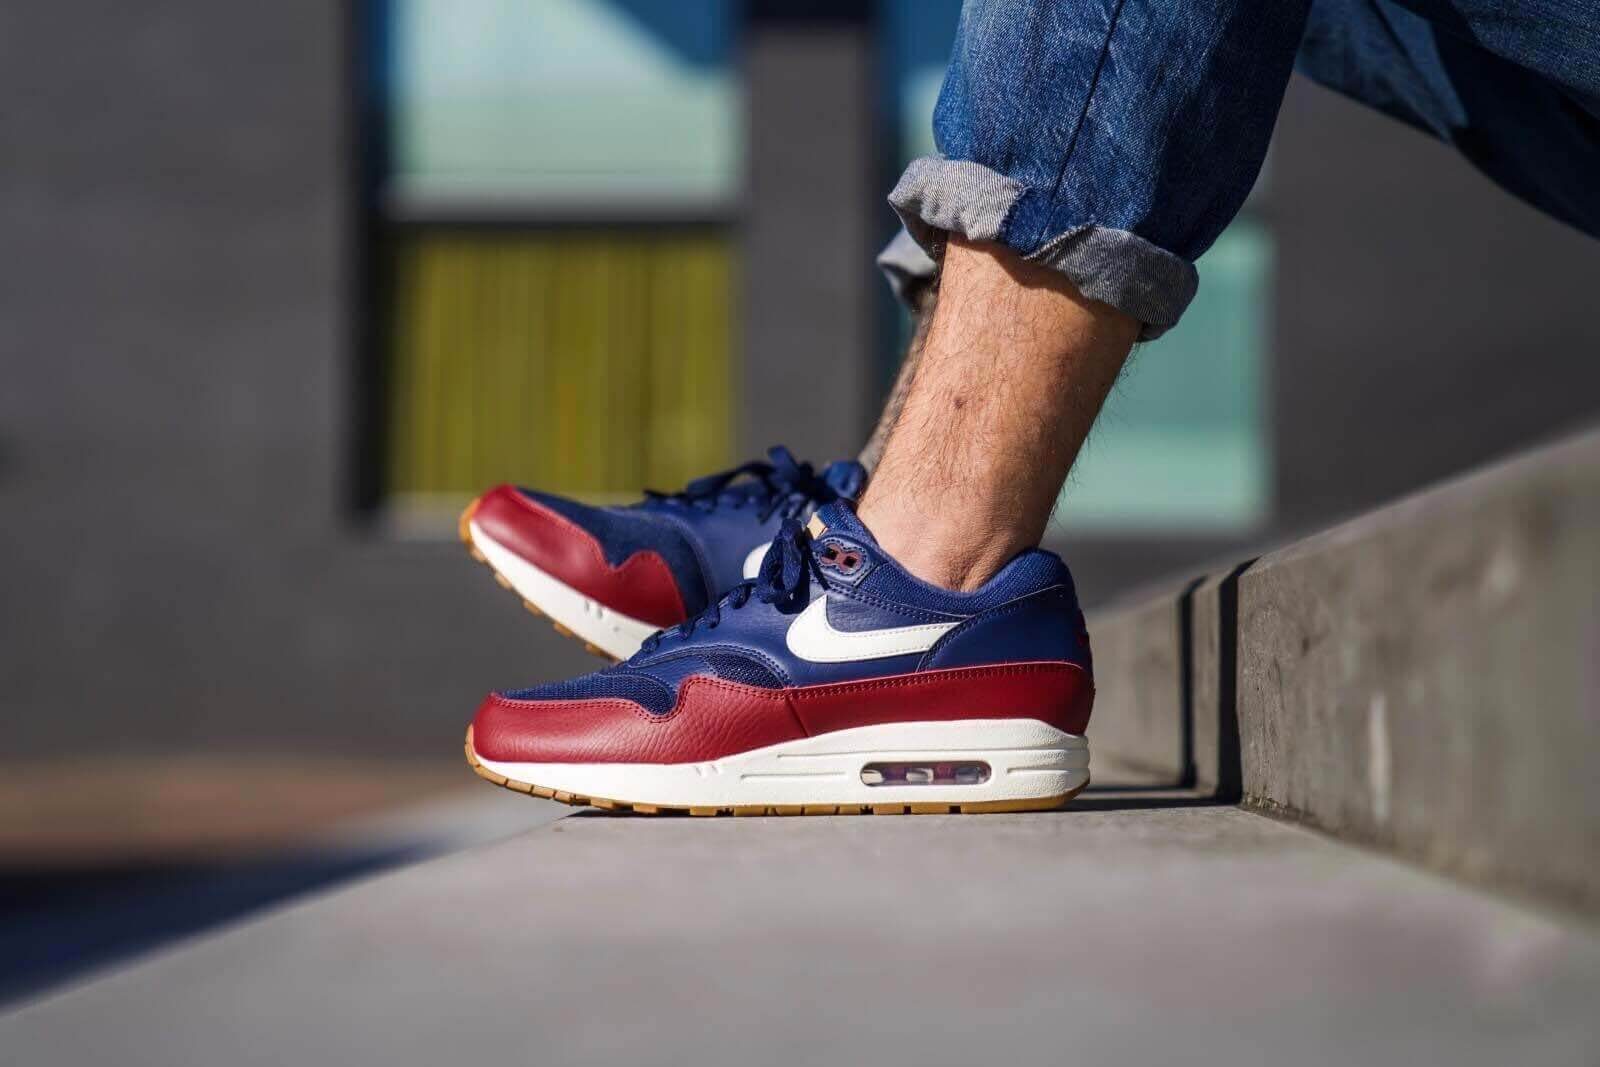 nike air max 1 navy blue red